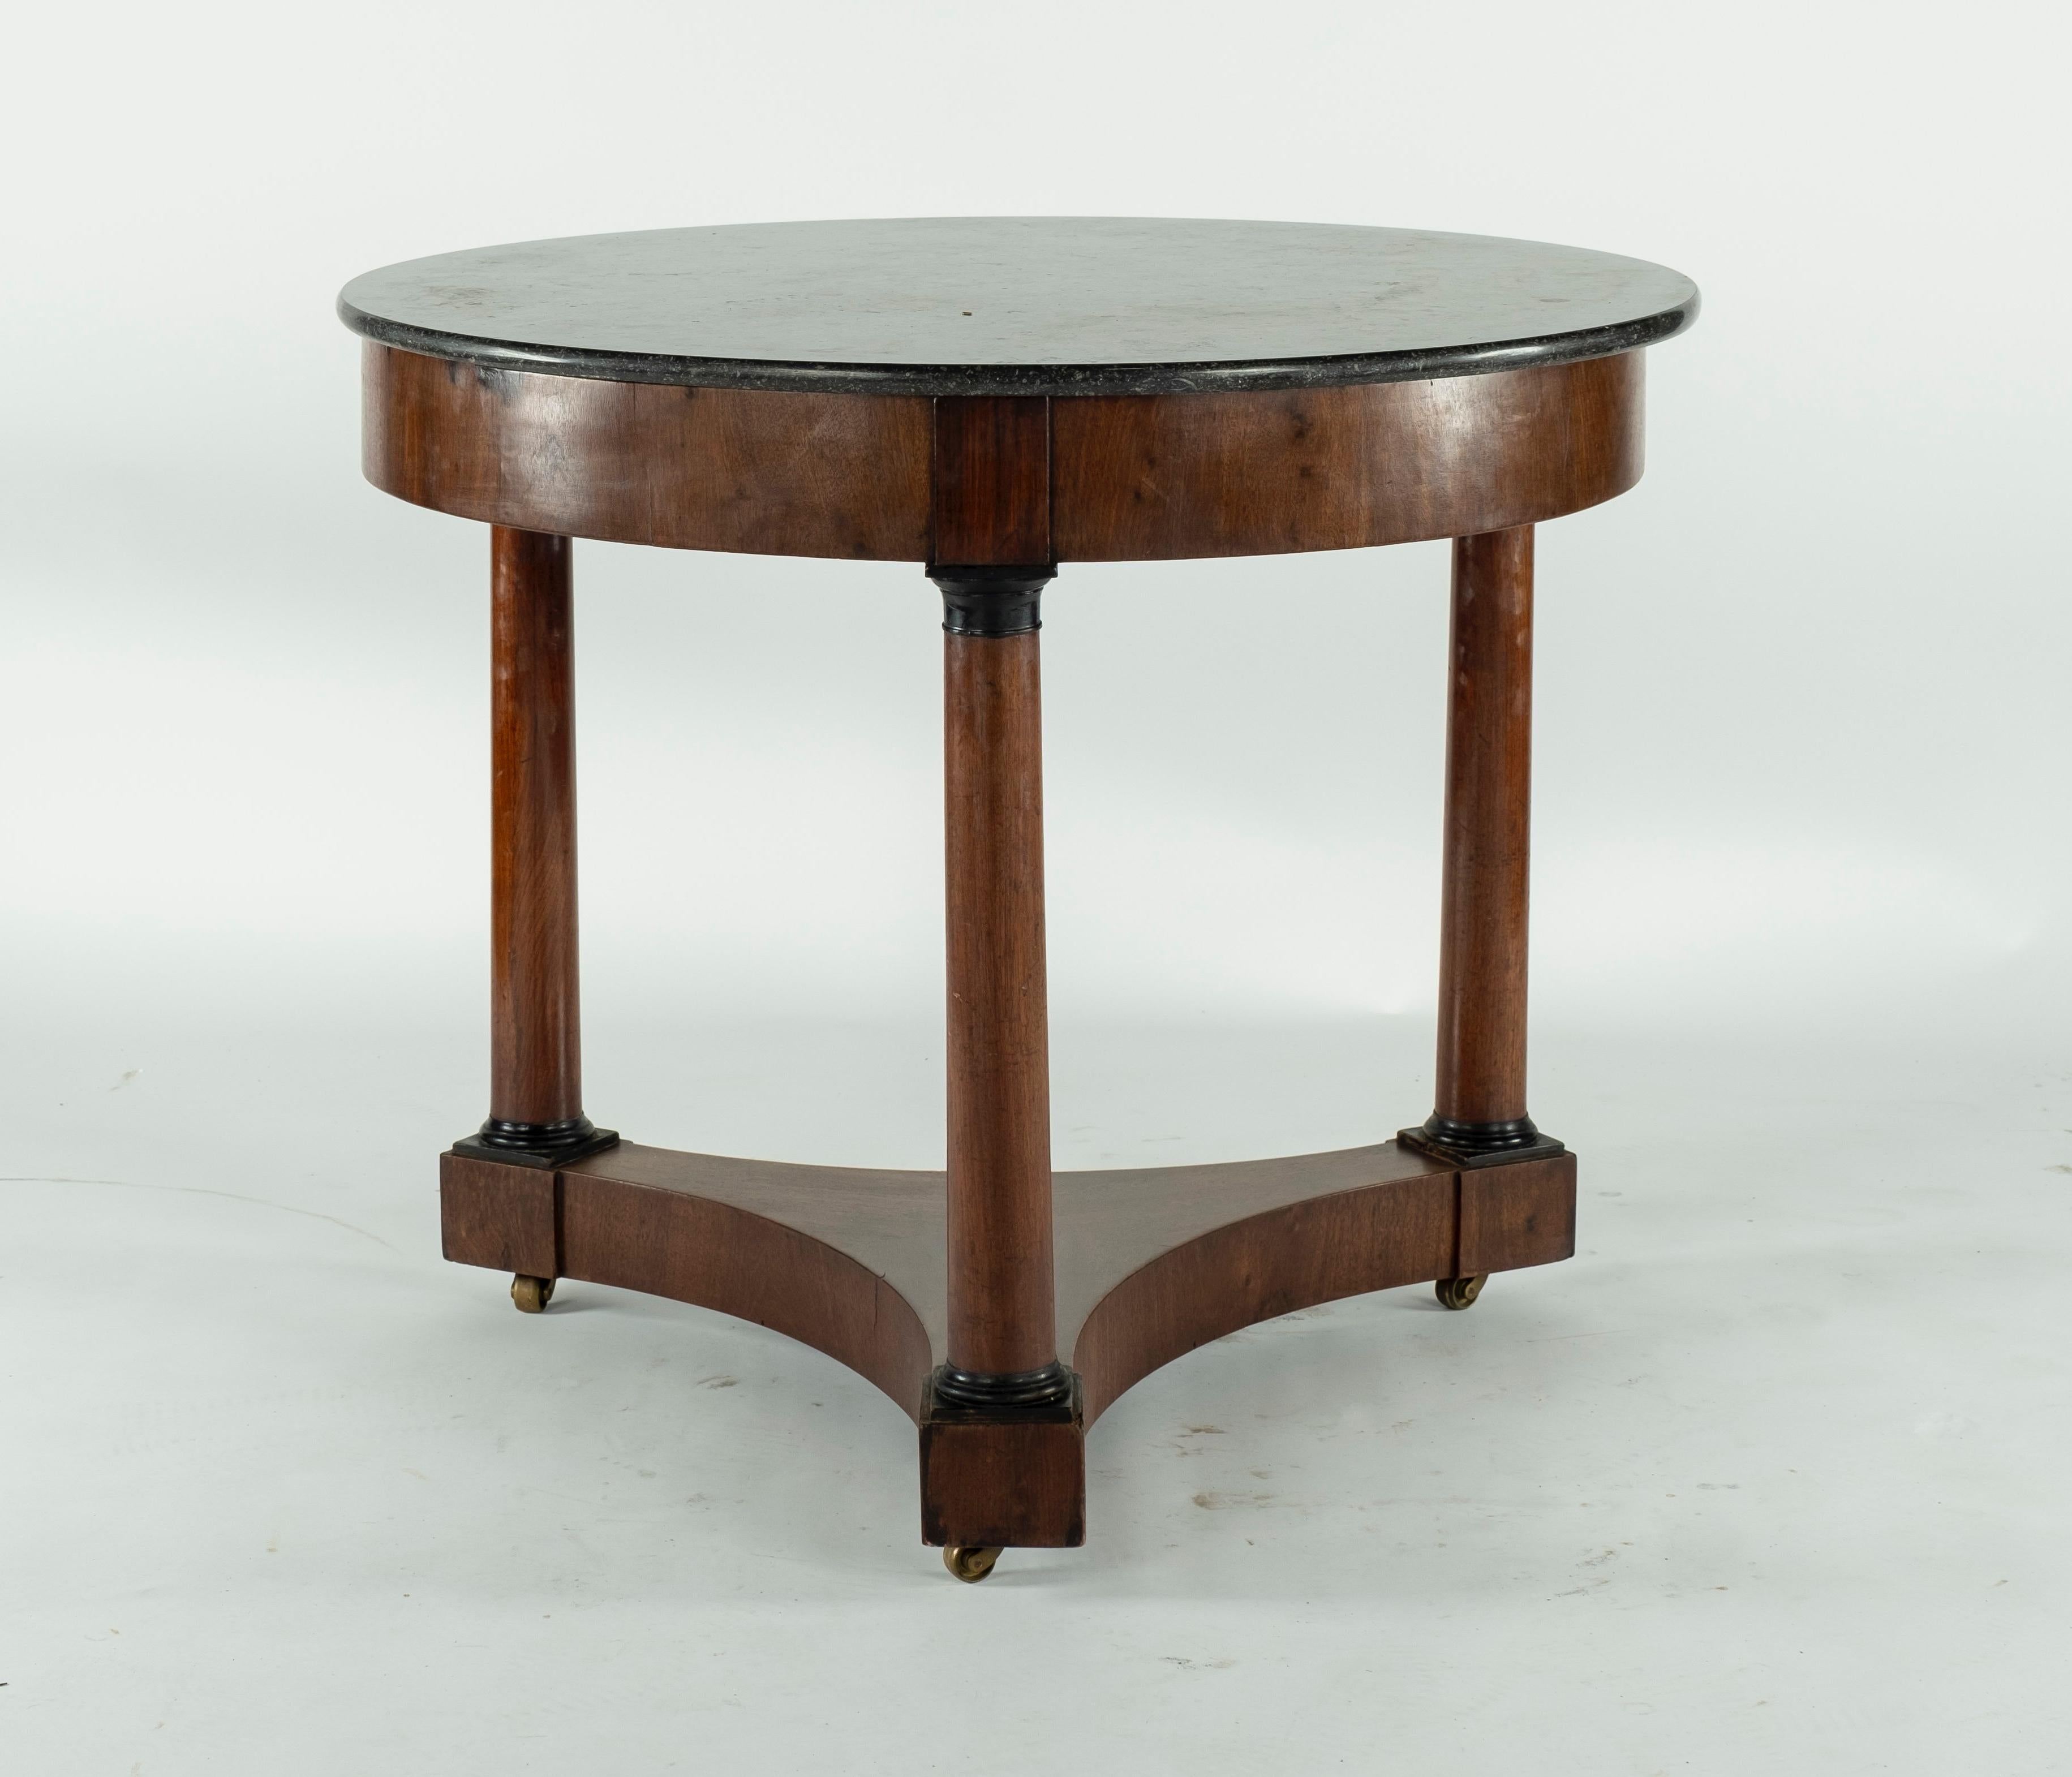 19th century beech gueridon with 3 legs on wheels. Legs are detailed with black lacquer at the top and at the base of each column.